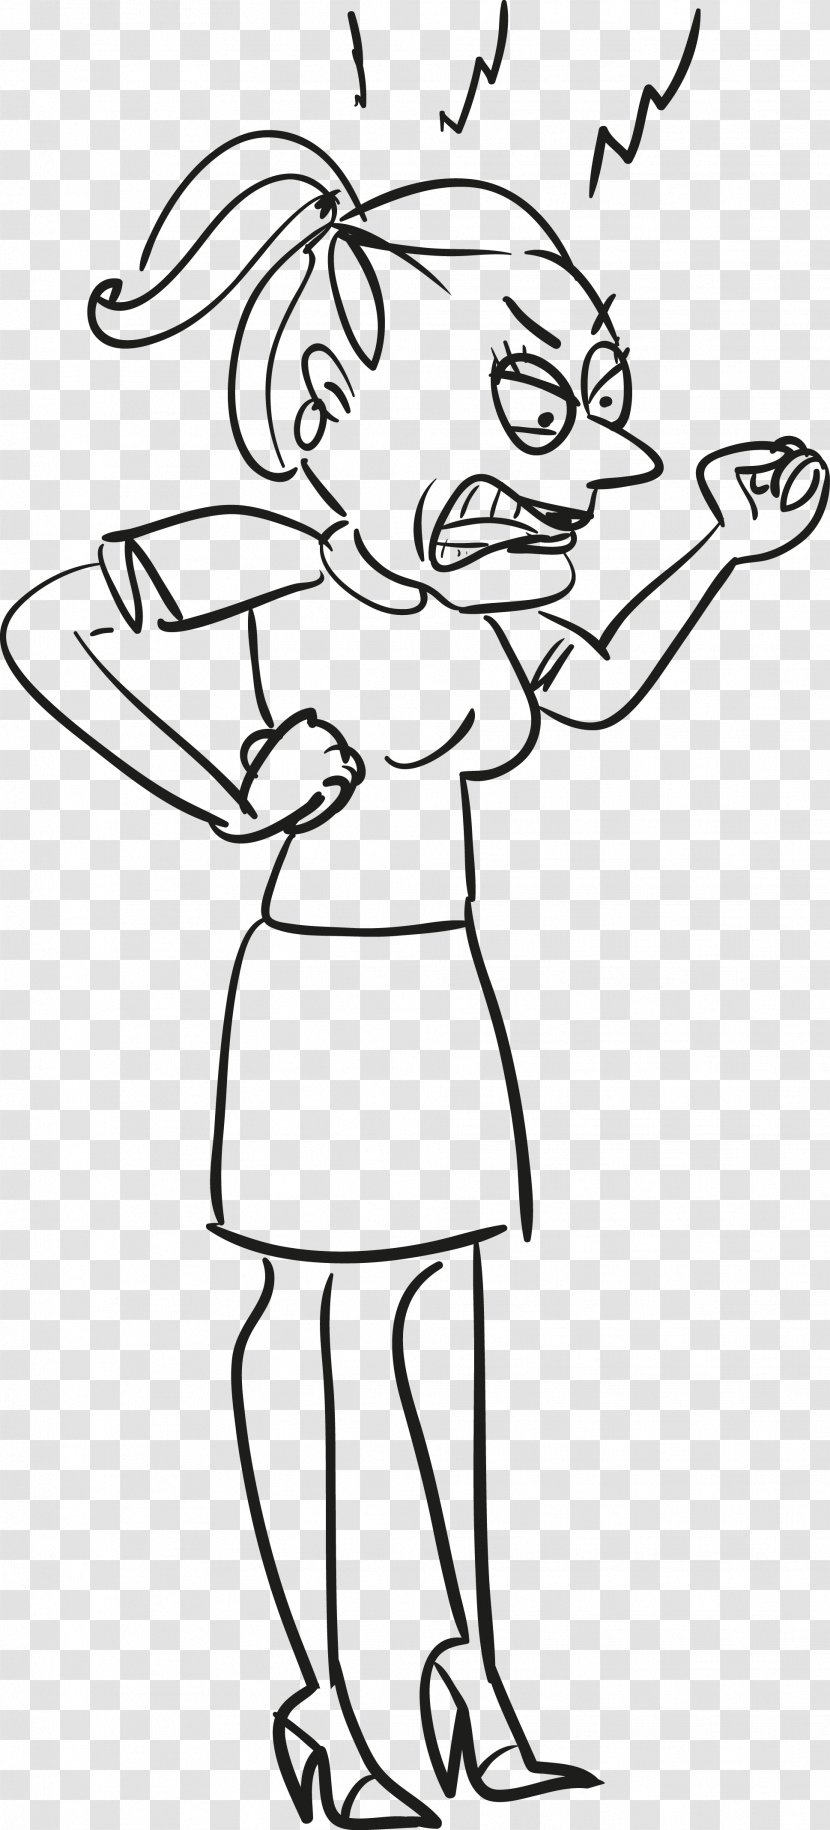 Cartoon Facial Expression Anger Clip Art - Tree - Angry Women; Hand Drawn Expressions; Character Vectors Transparent PNG